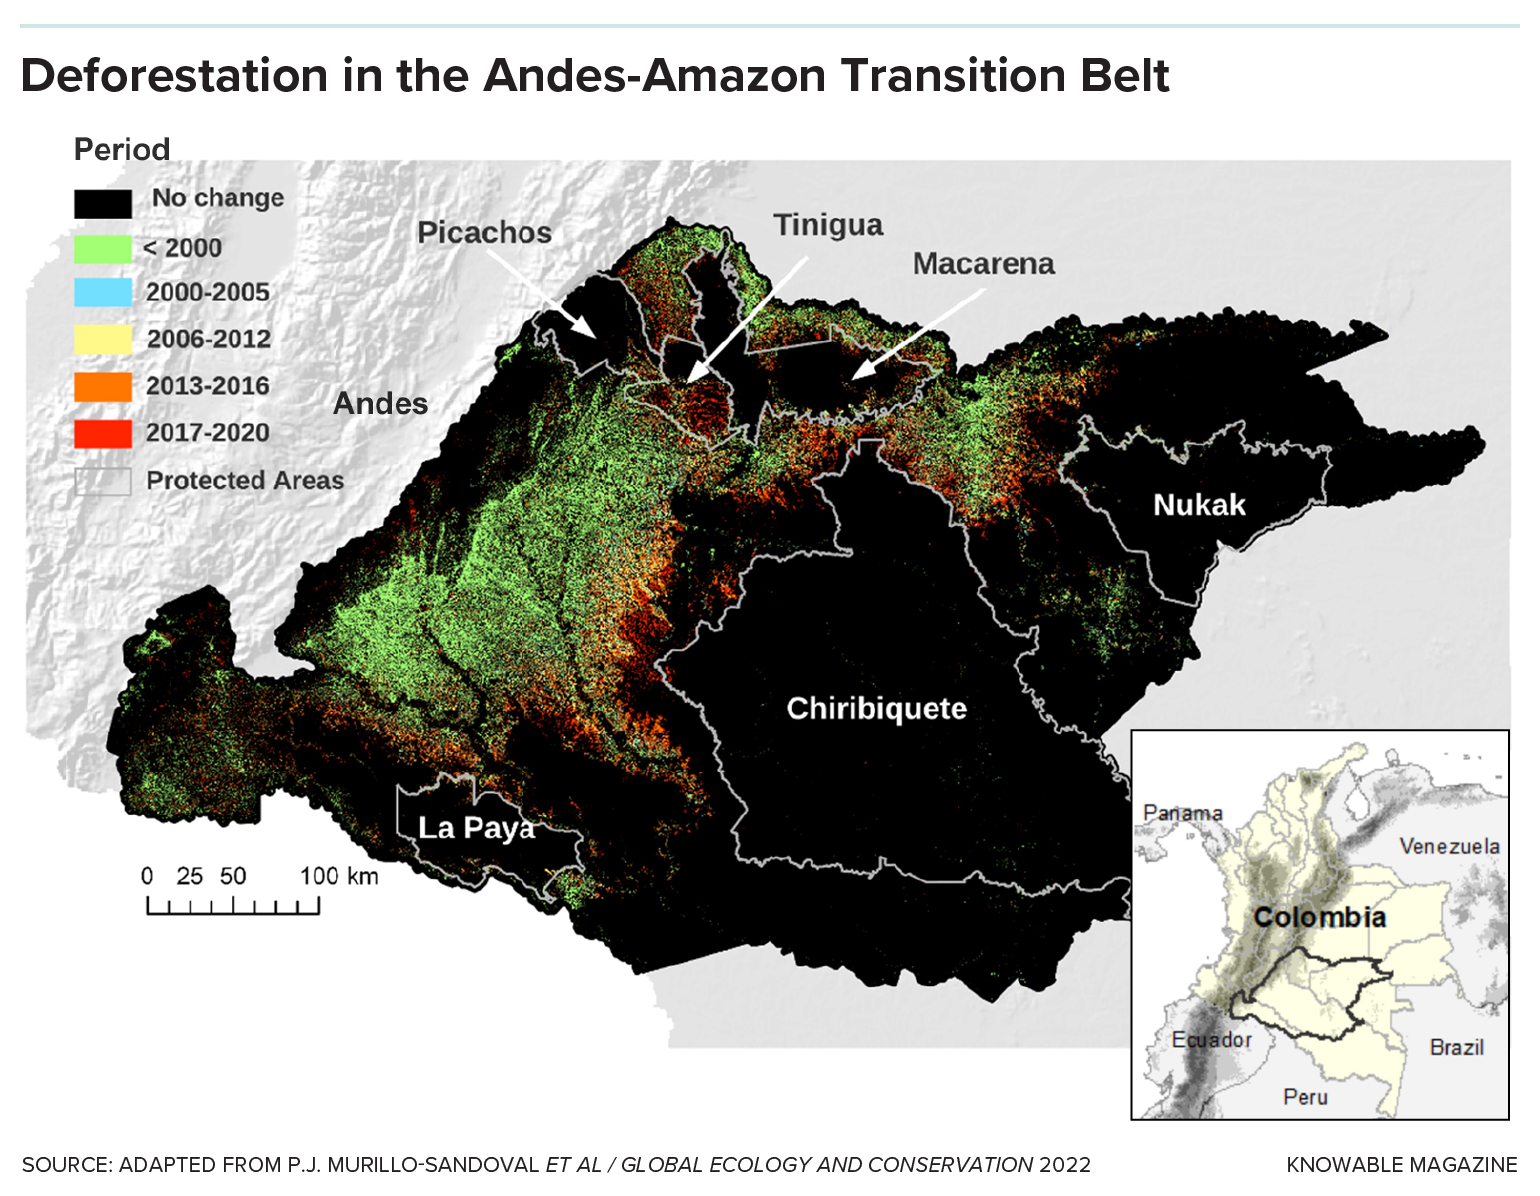 The map shows deforestation in the Andes-Amazon Transition Belt in Colombia over time. 